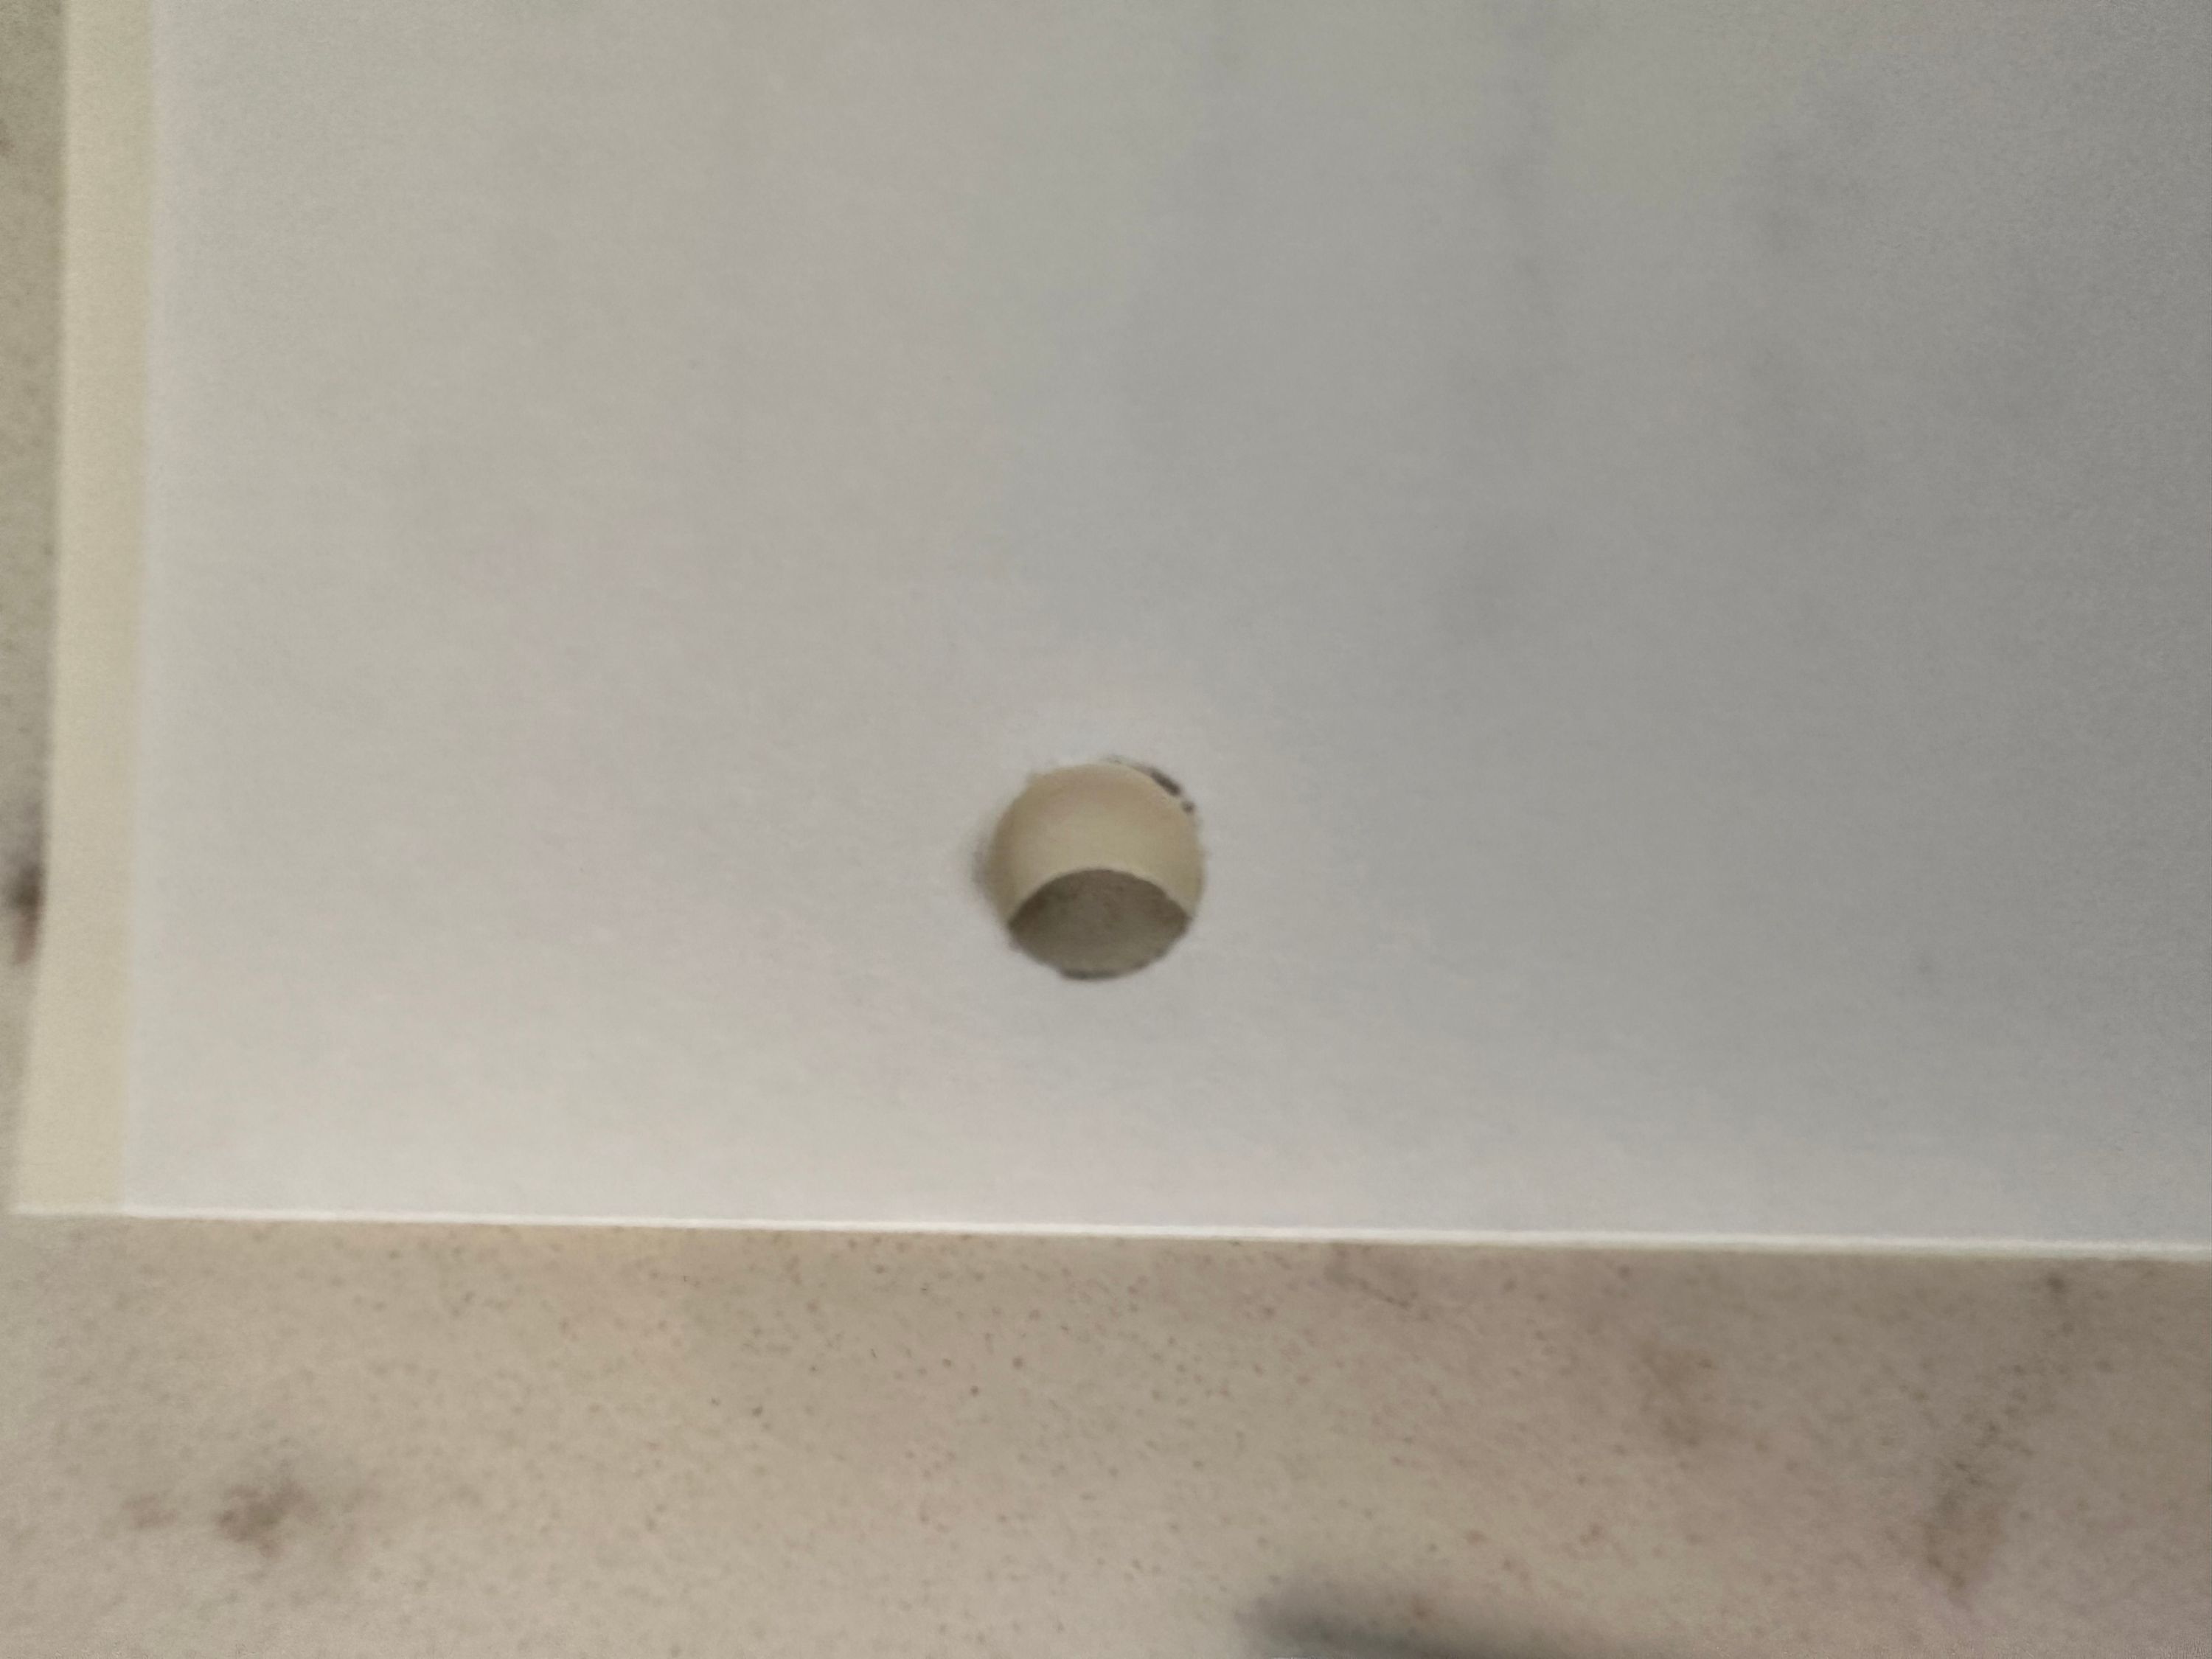 Two pieces of paper with holes punched in them, stacked to show the one eighth inch difference in how far the holes are inset from the edge of the page